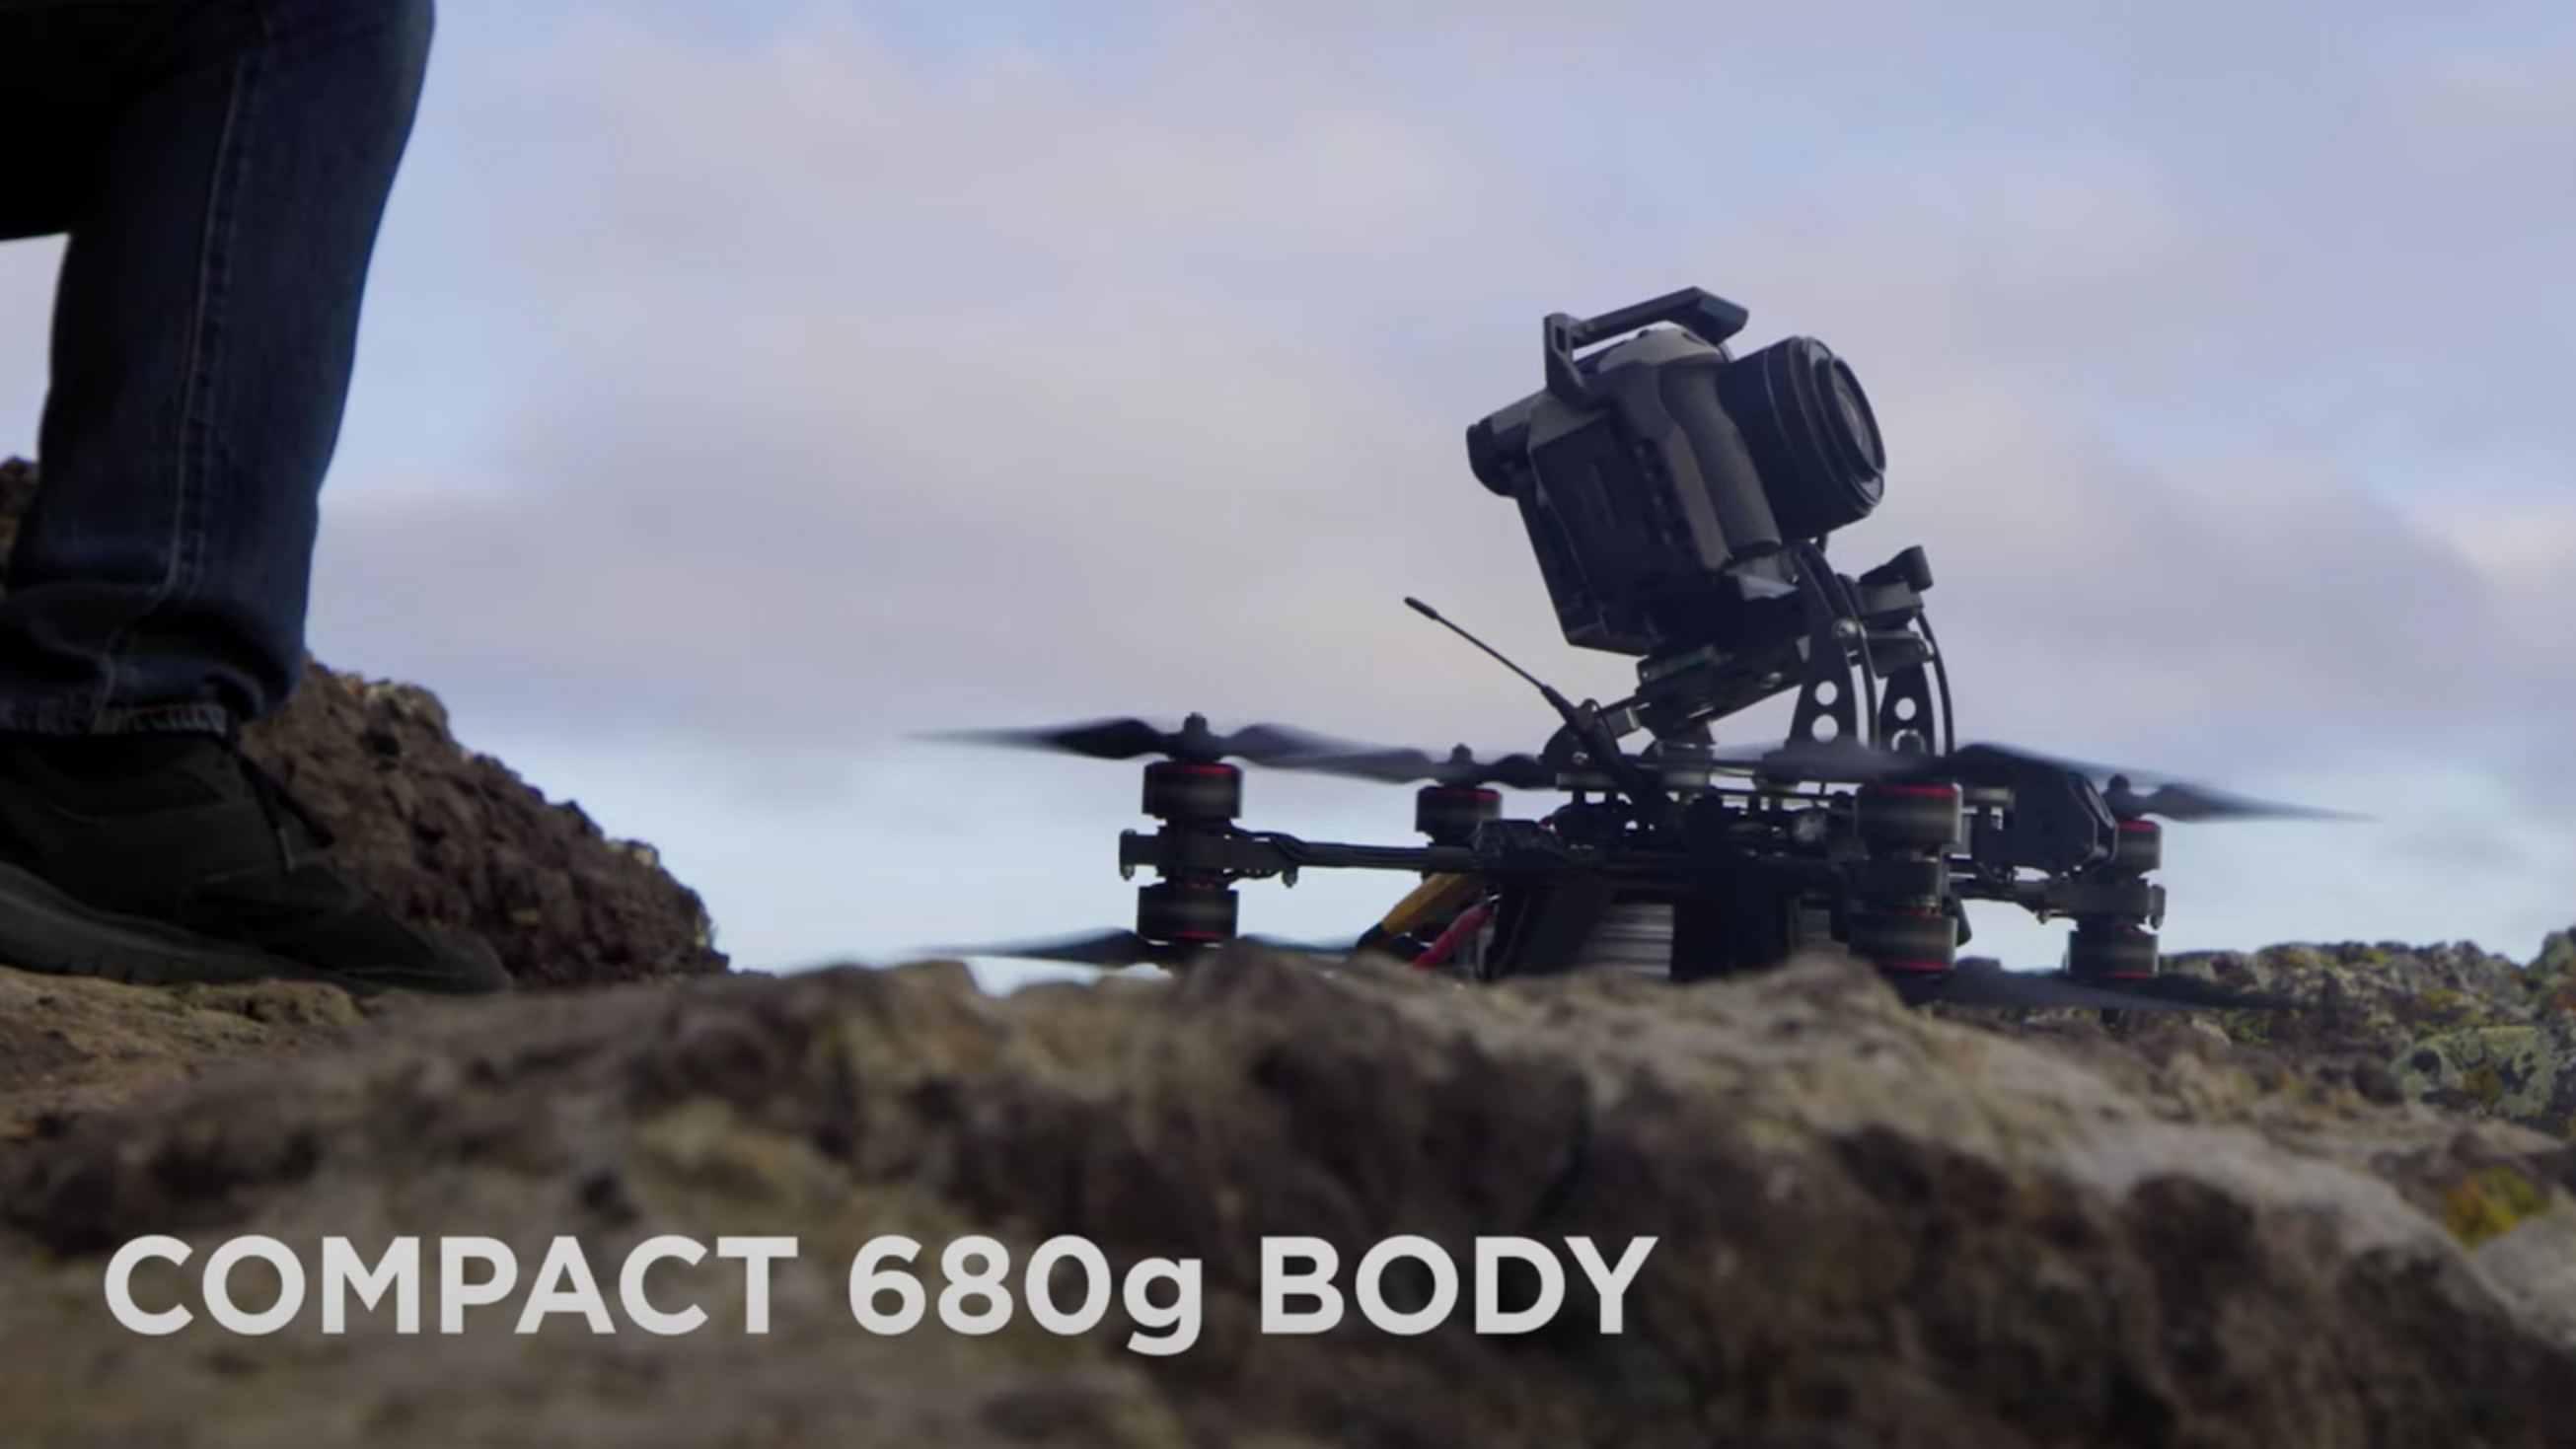 The Canon EOS R5 C camera mounted on a drone